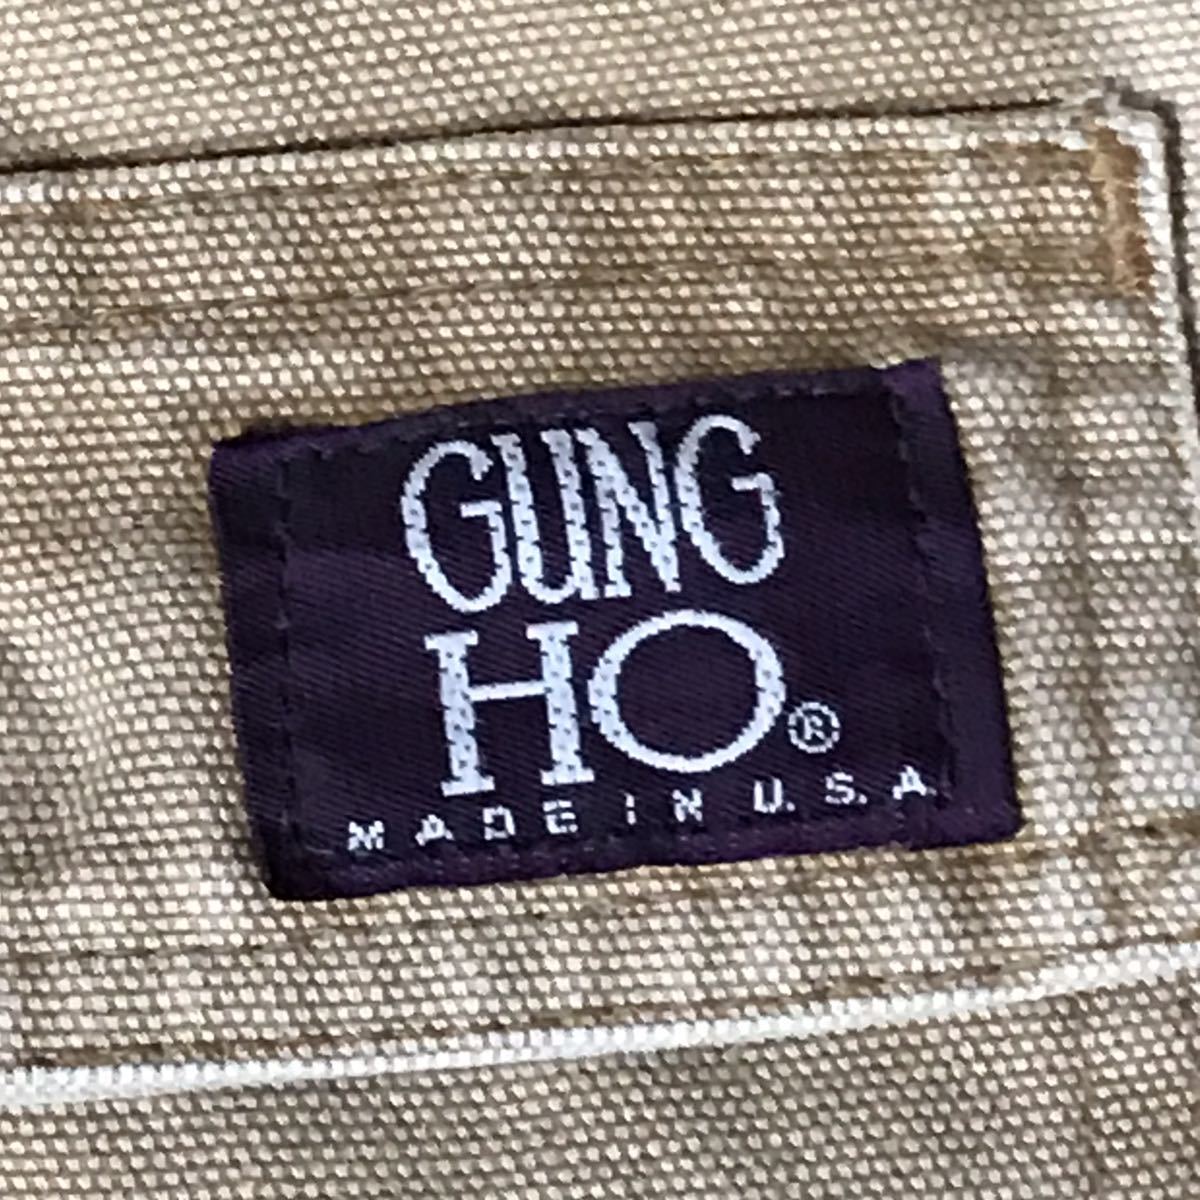 USED GUNG HO CARGO PANTS MADE IN USA 中古 ガンホー カーゴ パンツ W30.5 L26 (短め) アメリカ製 送料無料